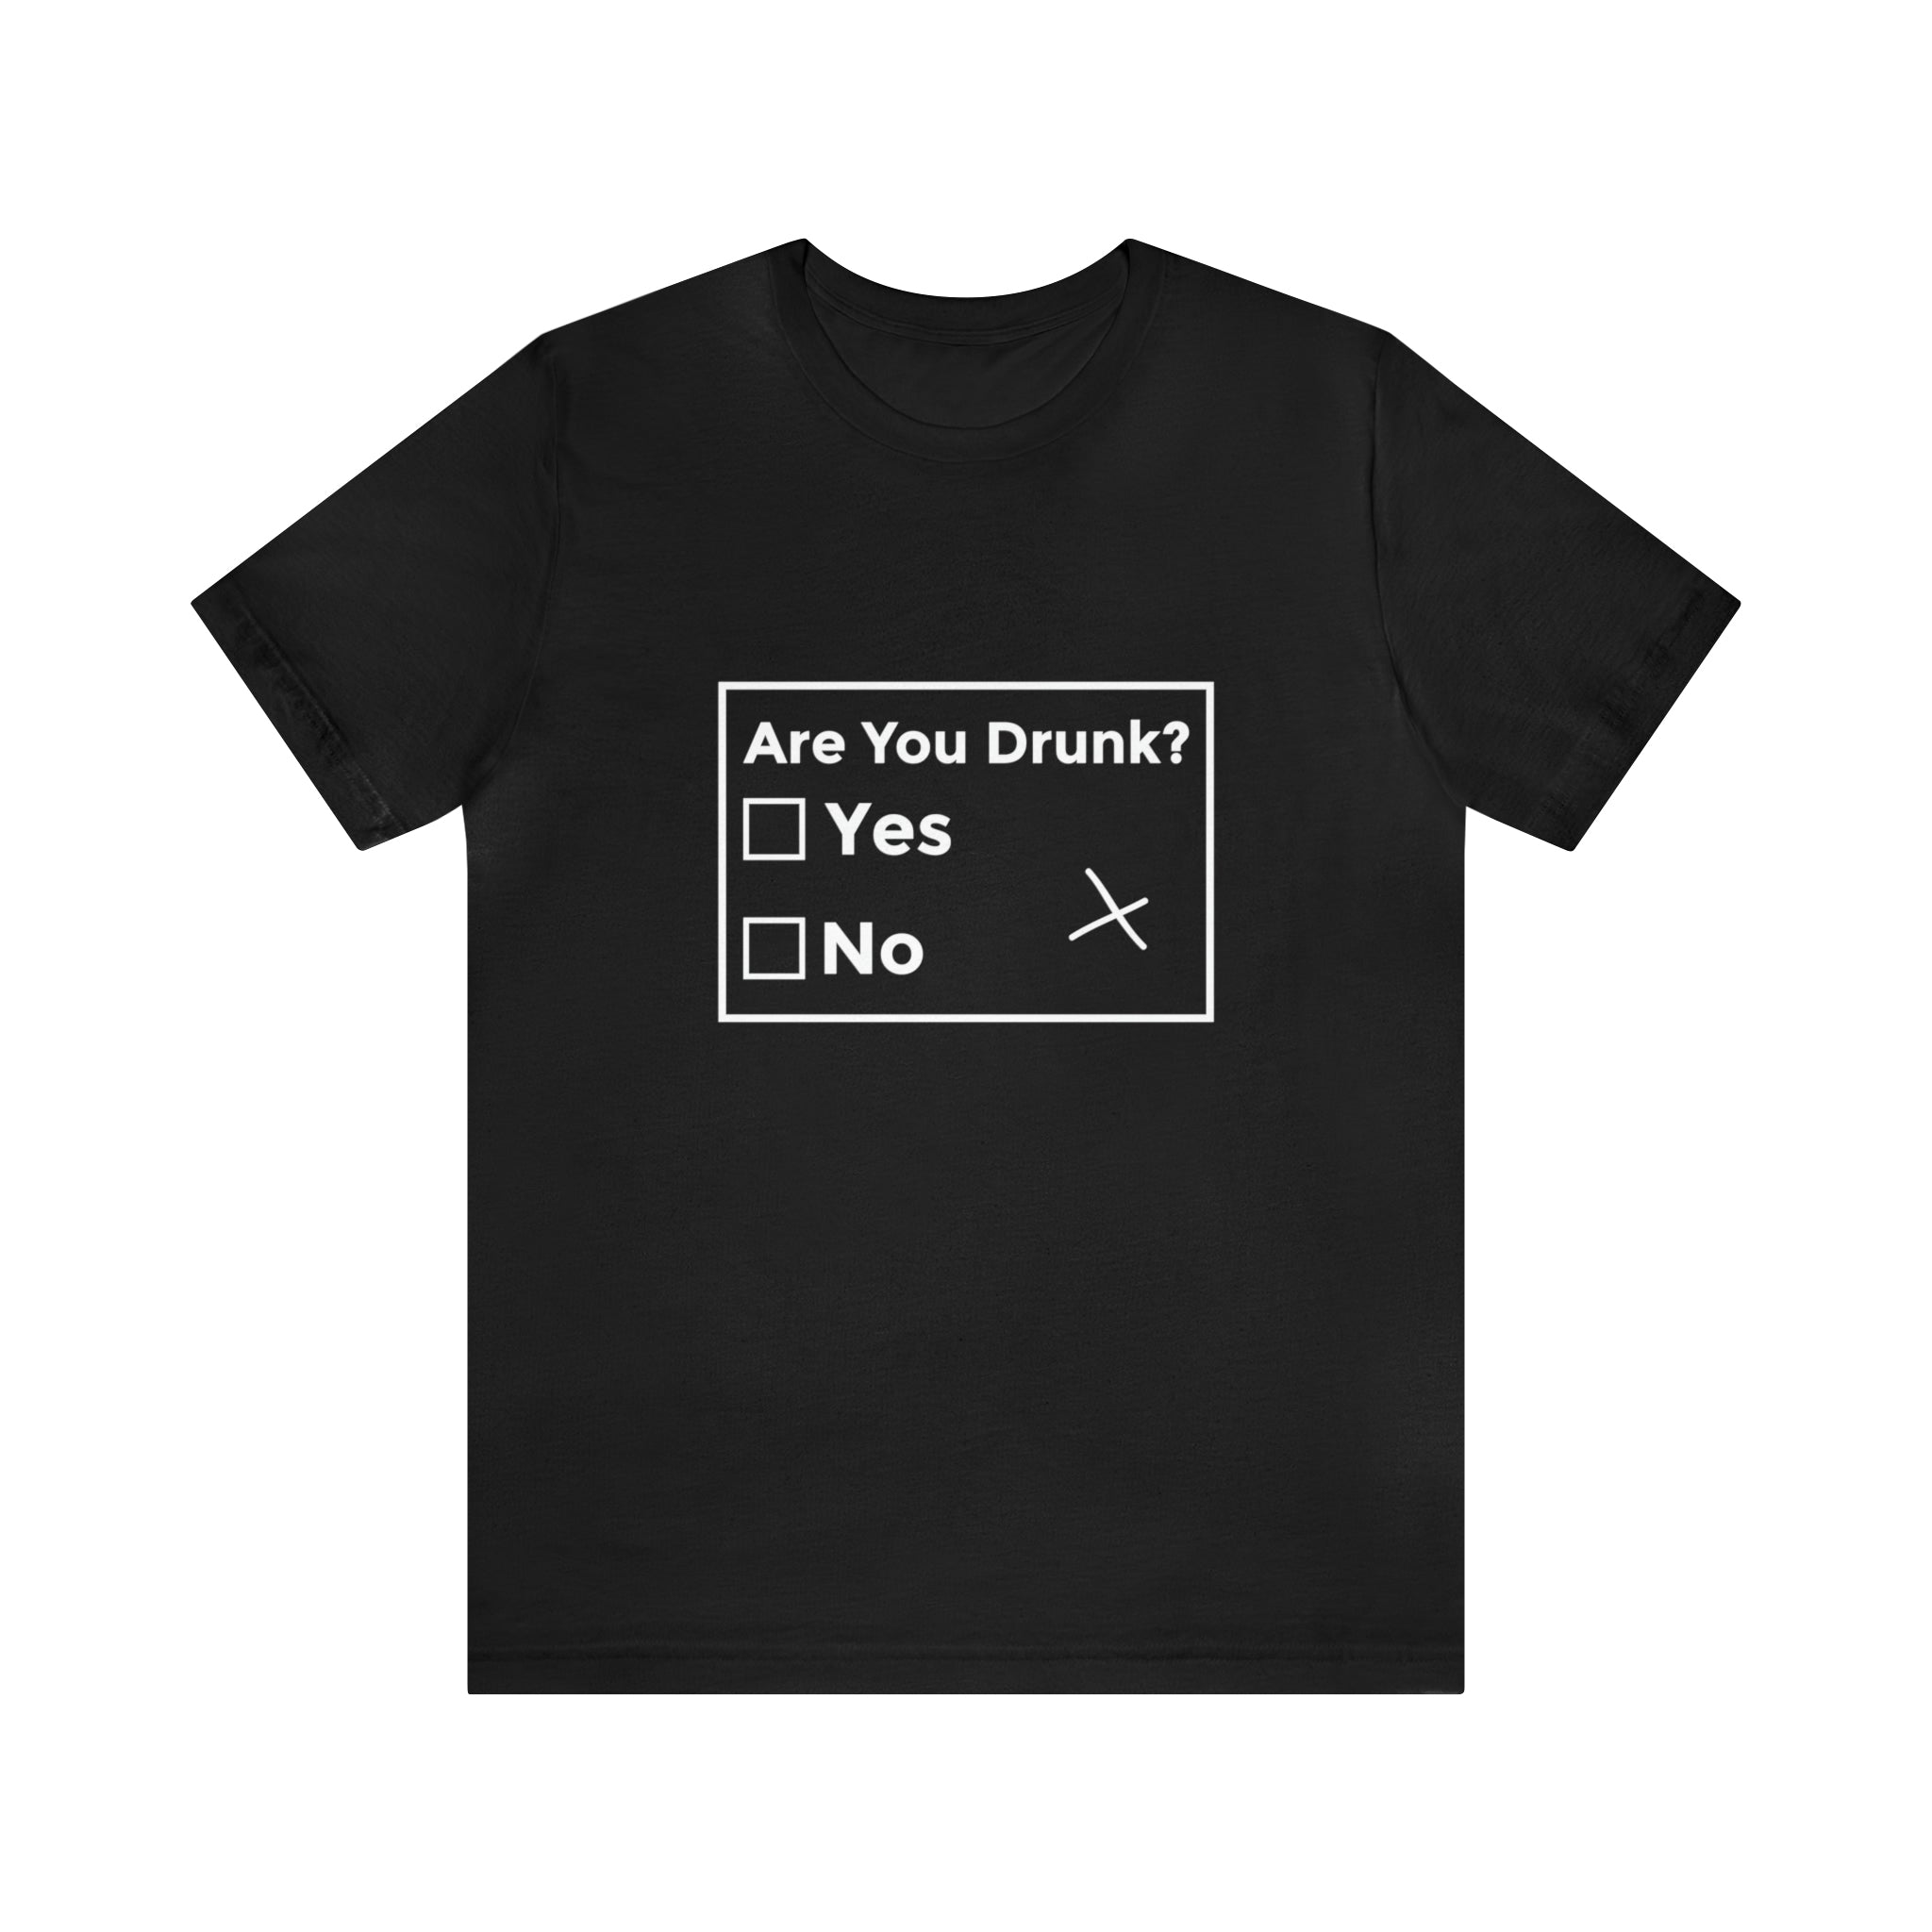 A "Are You Drunk?" T-shirt with white text.